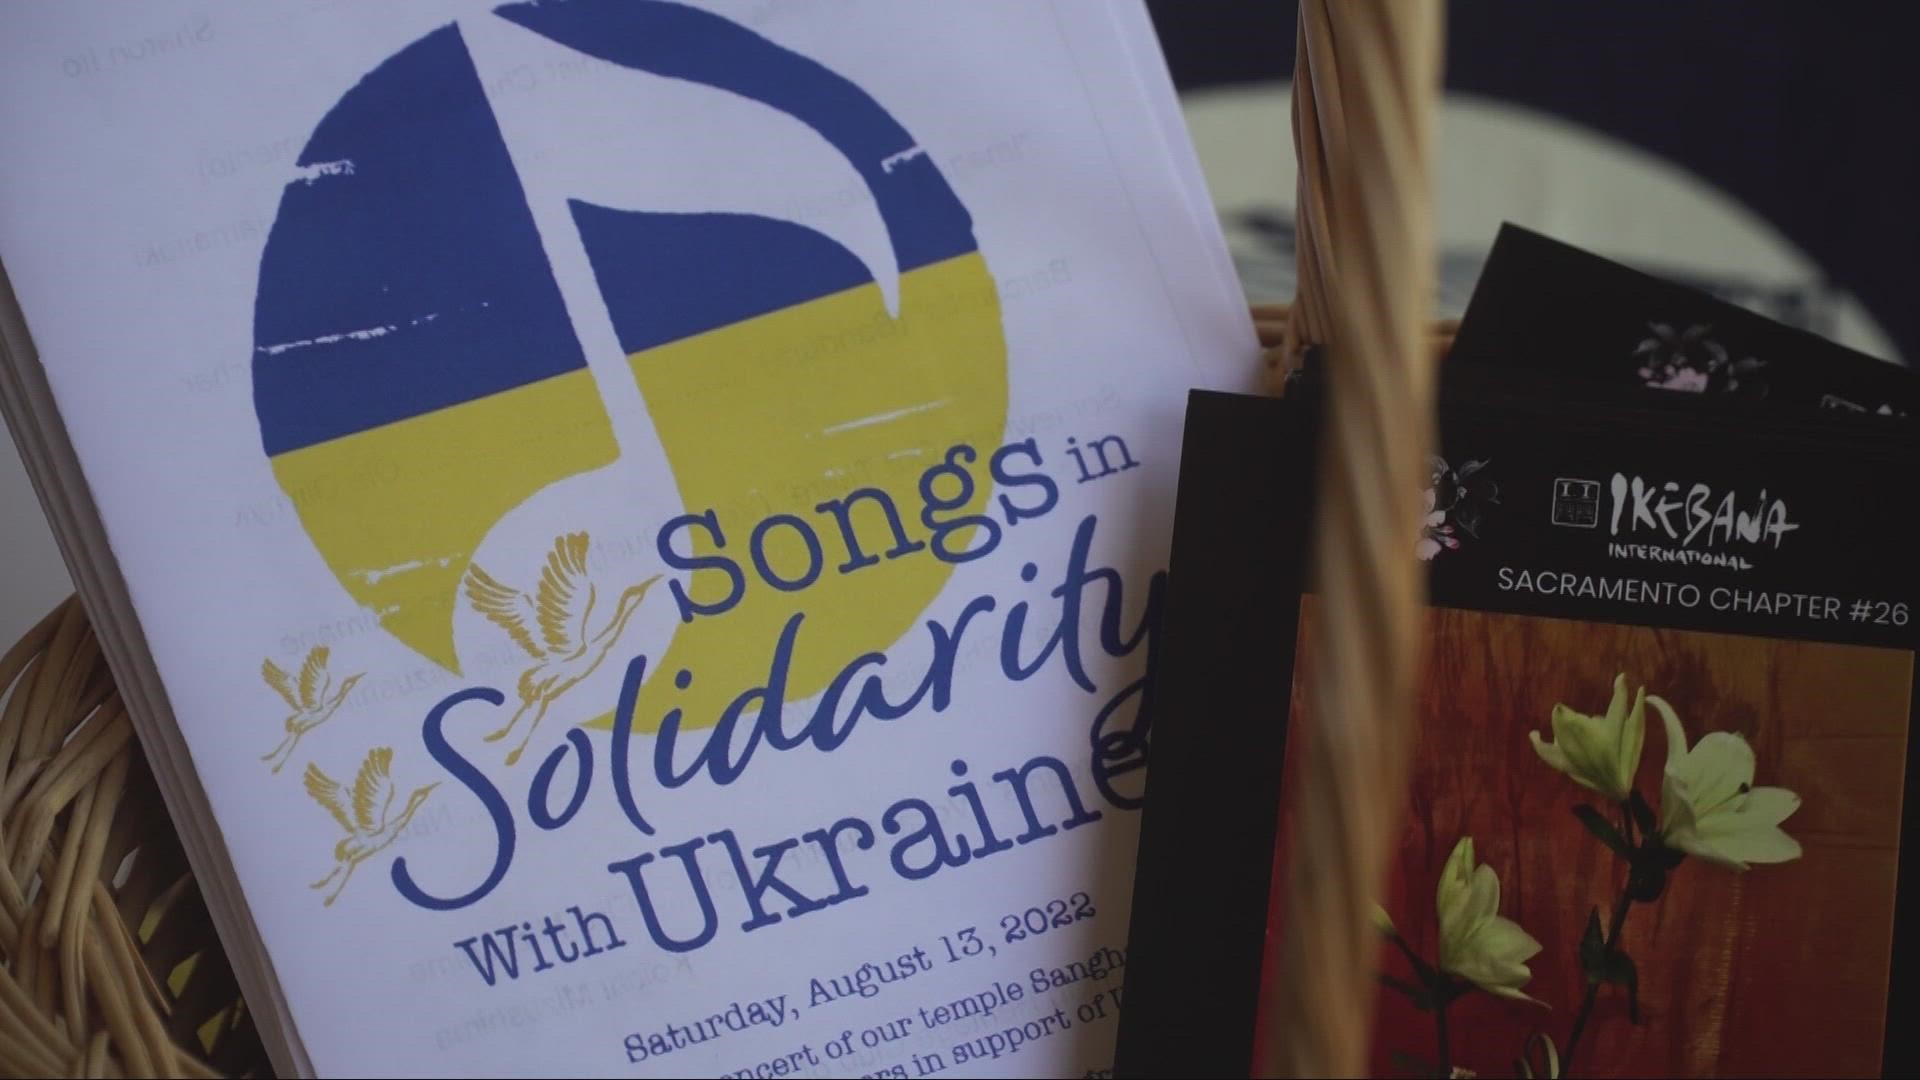 11 different performers were at the event to raise money and awareness for the war continuing on in Ukraine.